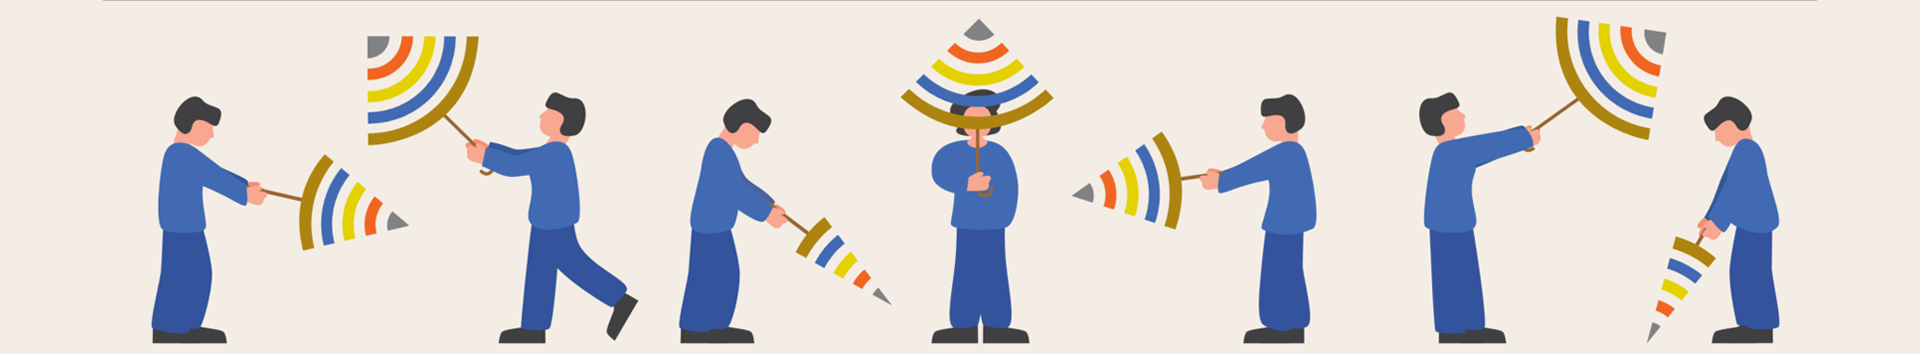 Seven illustrated men are putting up colourful, striped umbrellas. They are all holding their umbrella in a different position and are at different stages of putting the umbrella up